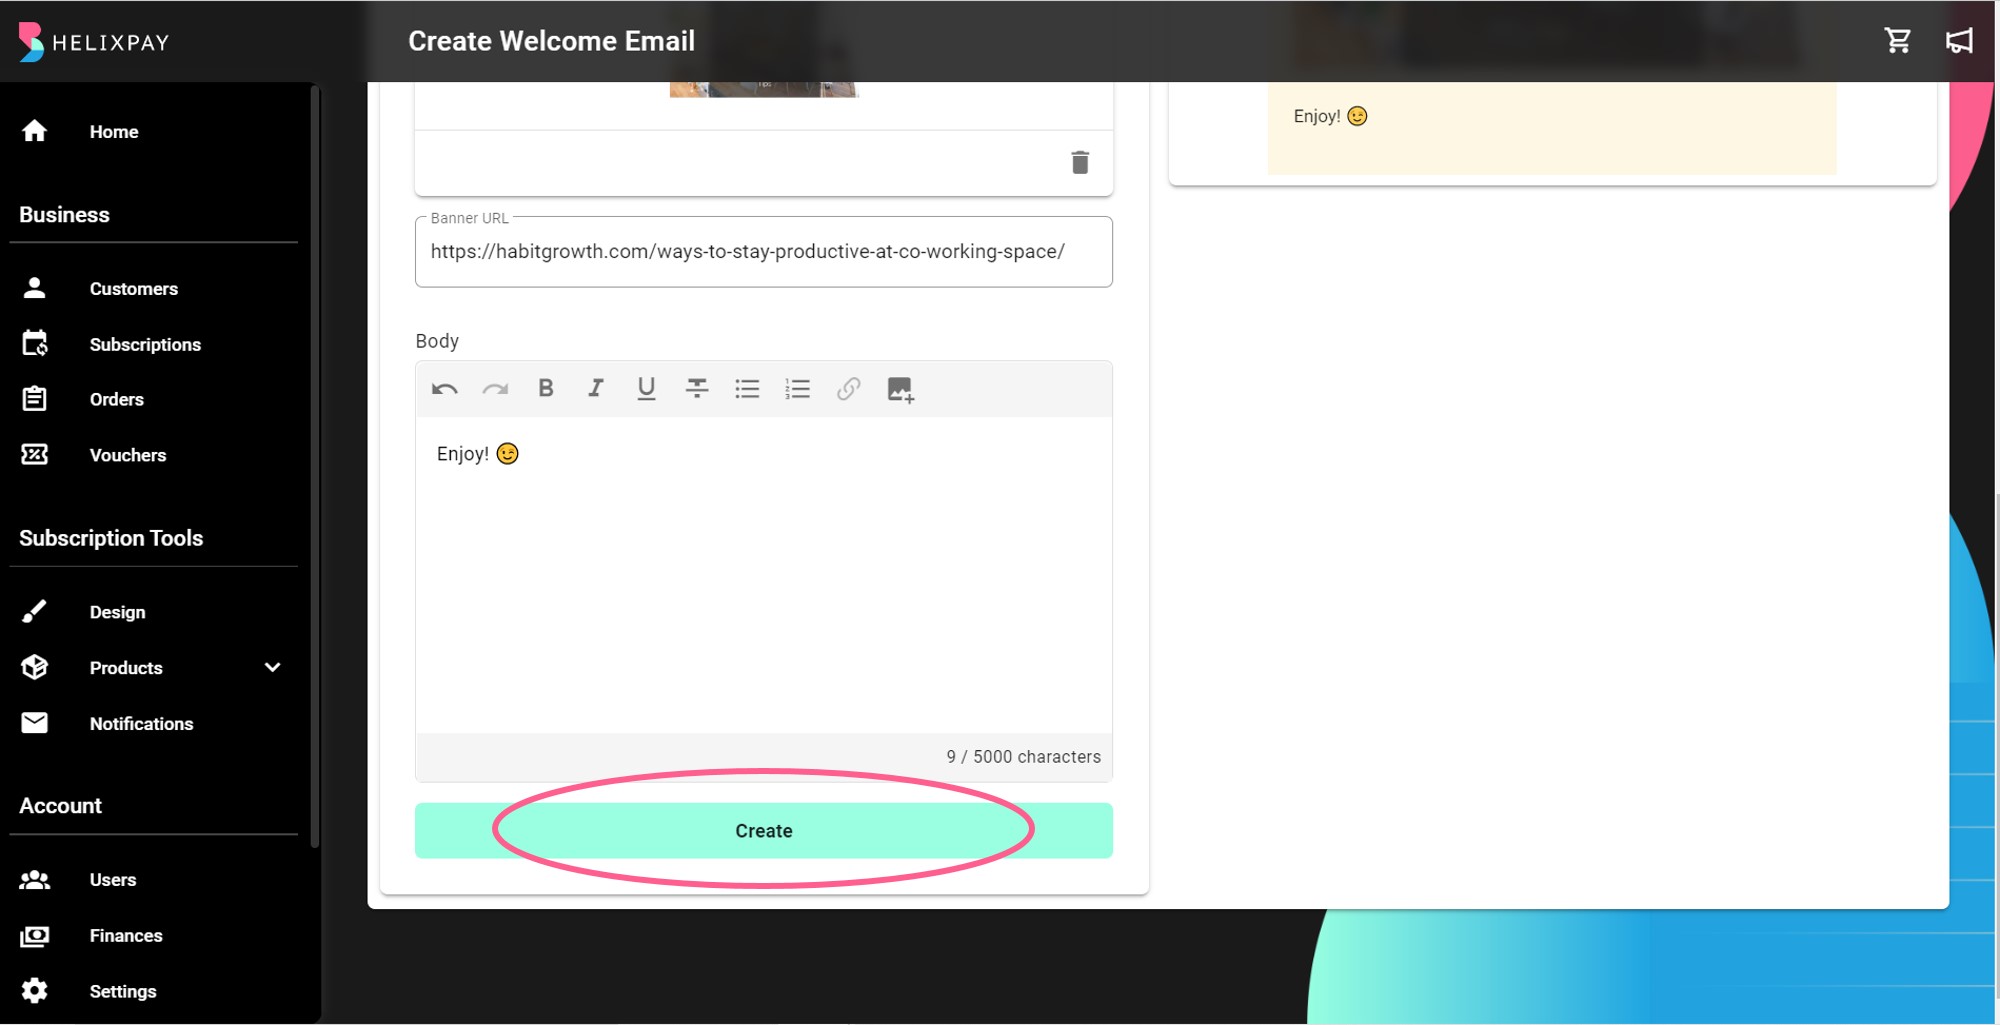 Upon creating the welcome email, you will see a message that it was successfully created along with the other welcome emails created.